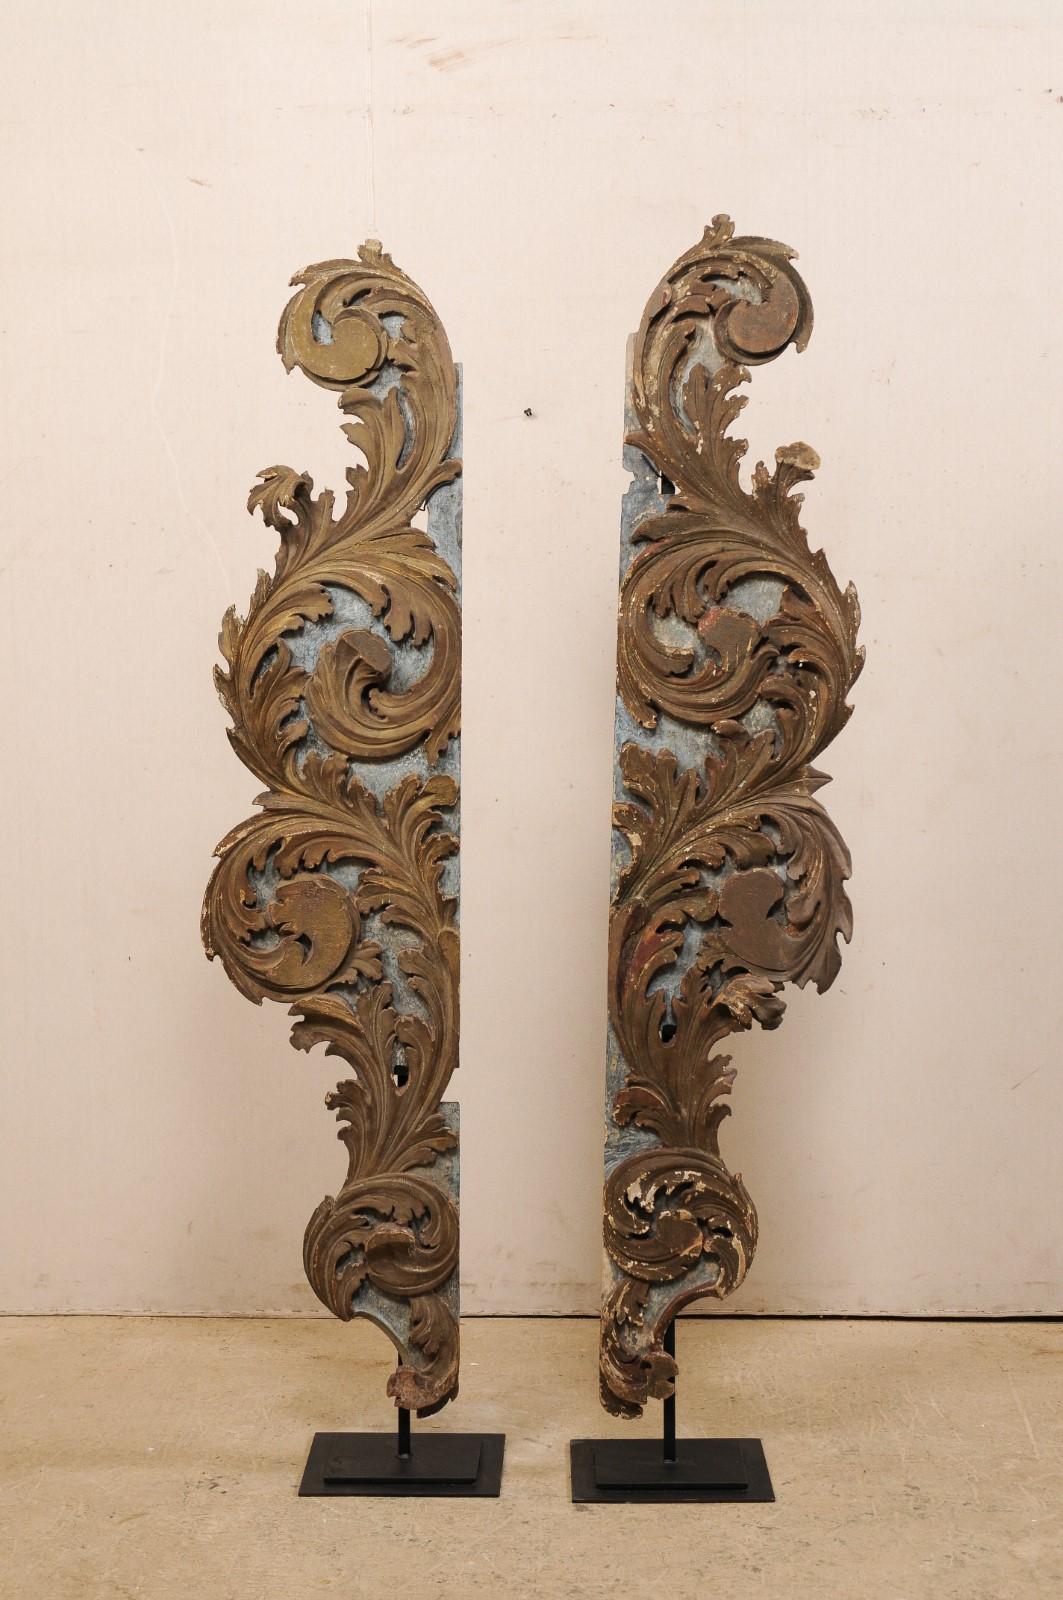 A fabulous pair of Italian carved-wood fragments from the turn of the 18th and 19th century, mounted on custom stands. These antique wooden fragments from Italy have been hand carved in a scrolling acanthus leave motif. The carvings are decorated on